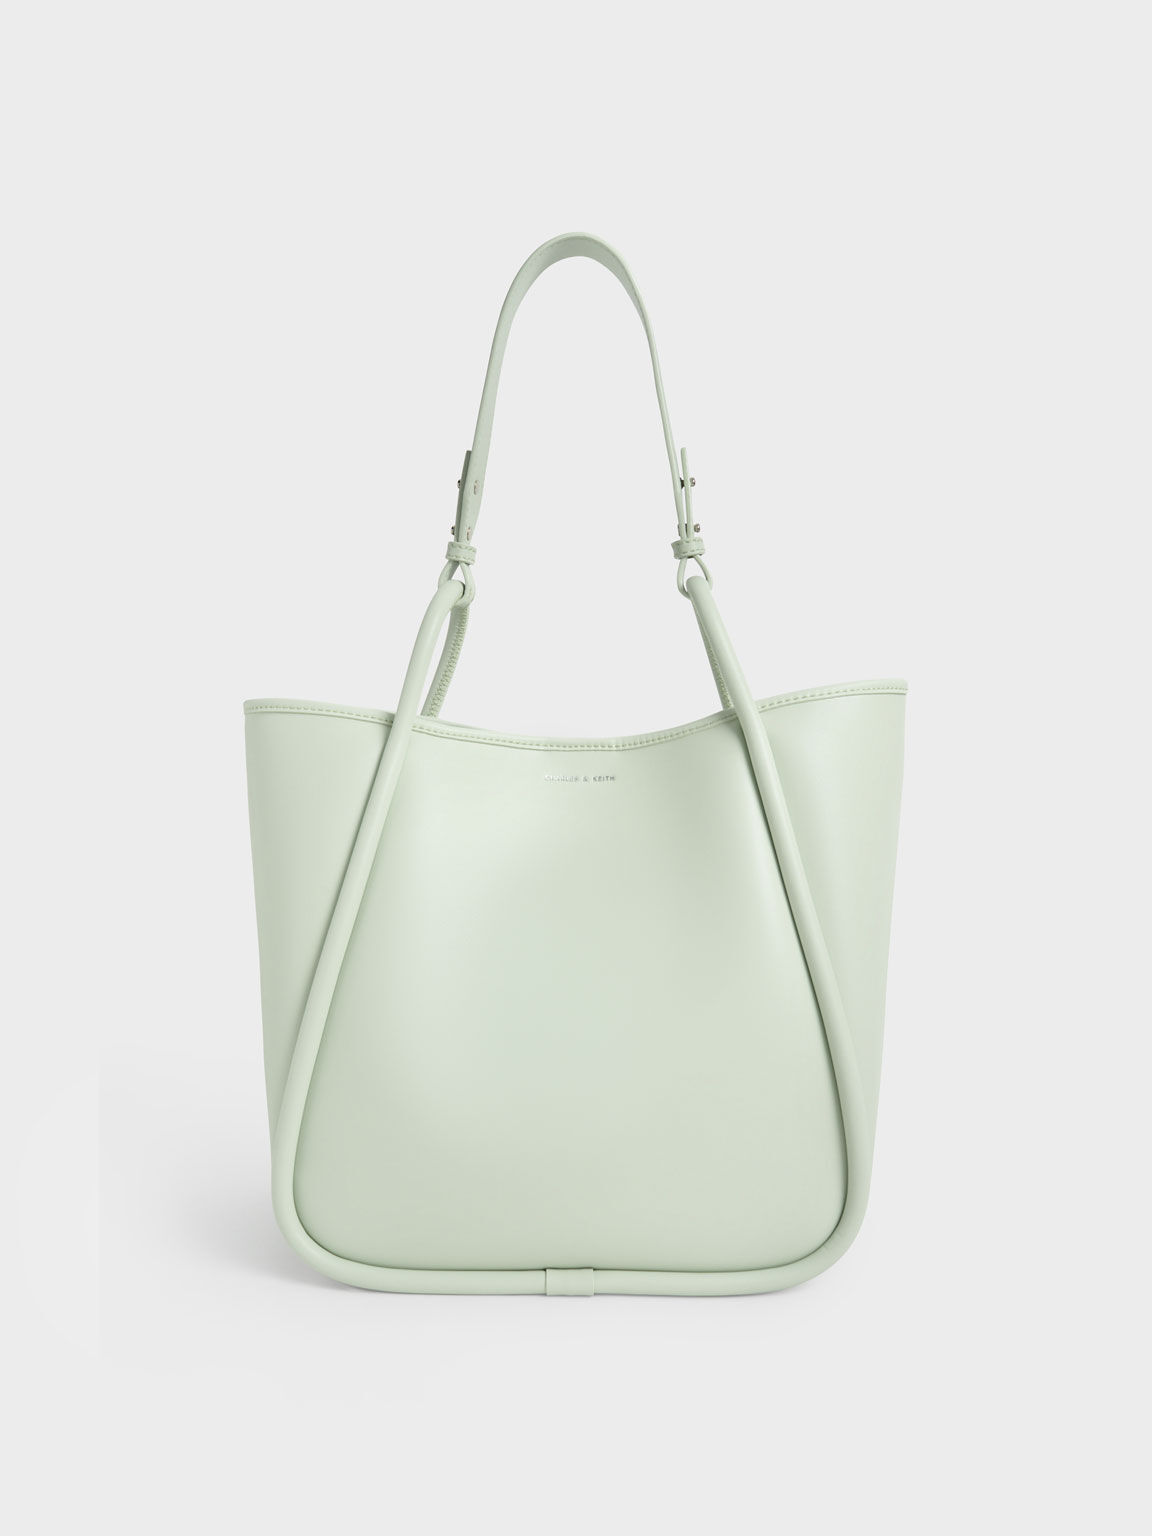 Large Slouchy Tote Bag, Mint Green, hi-res